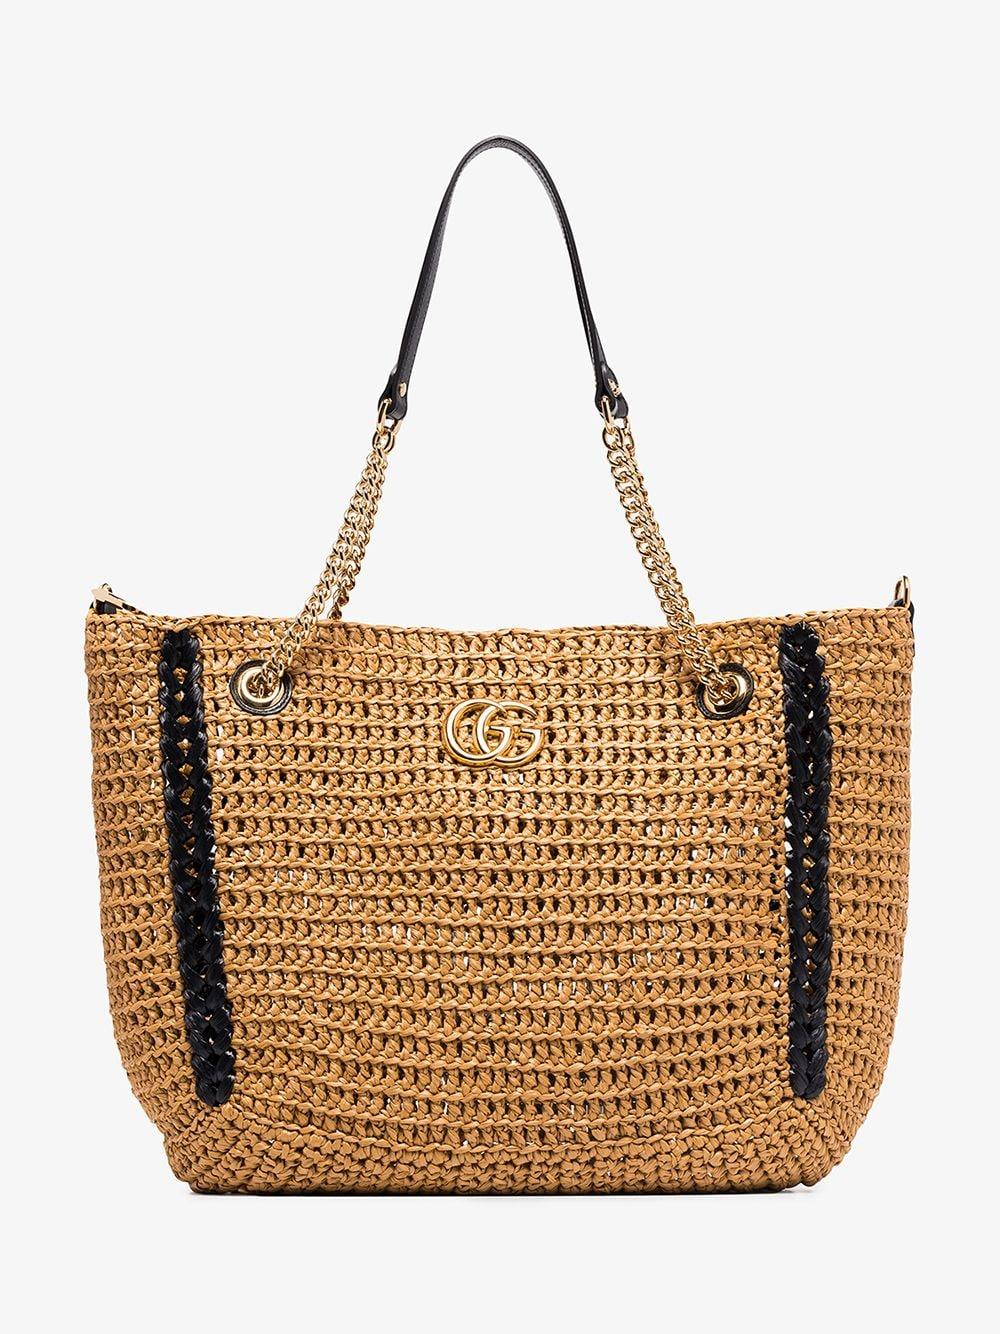 Gucci Large Raffia Marmont Tote Bag in Brown | Lyst